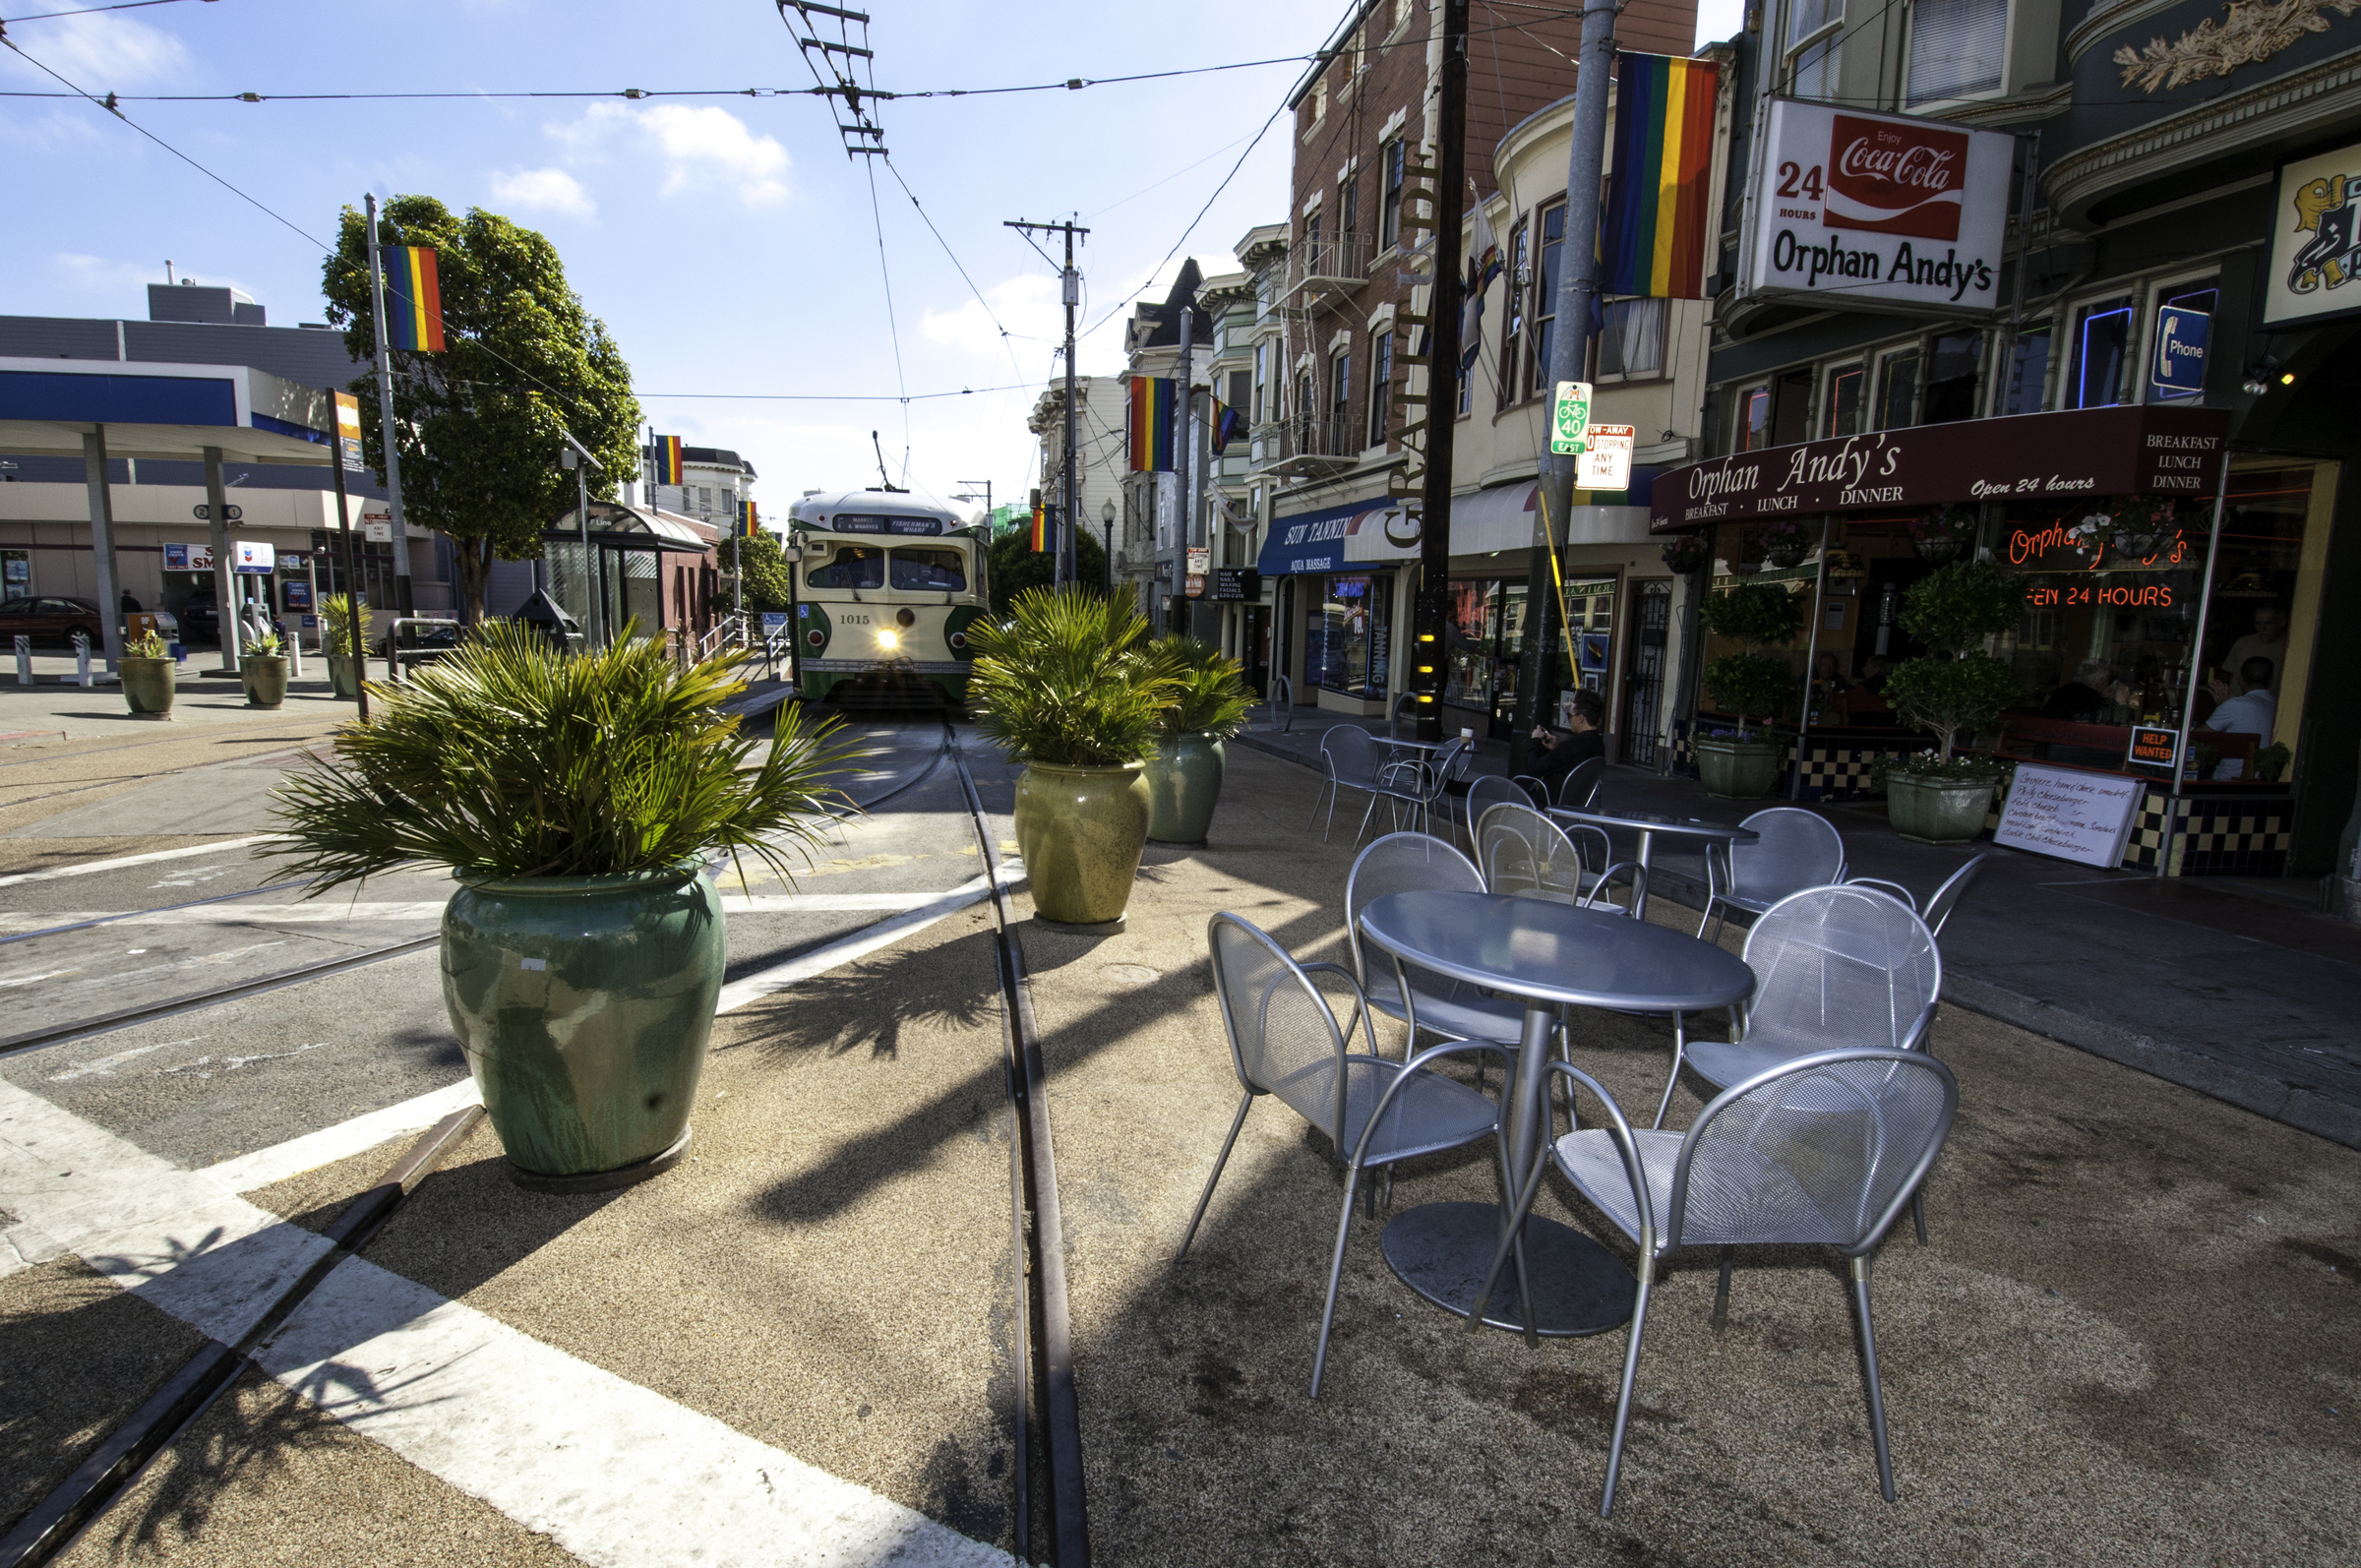 Chairs and planters in the Castro Street parklet next to a cream and green Muni historic streetcar.